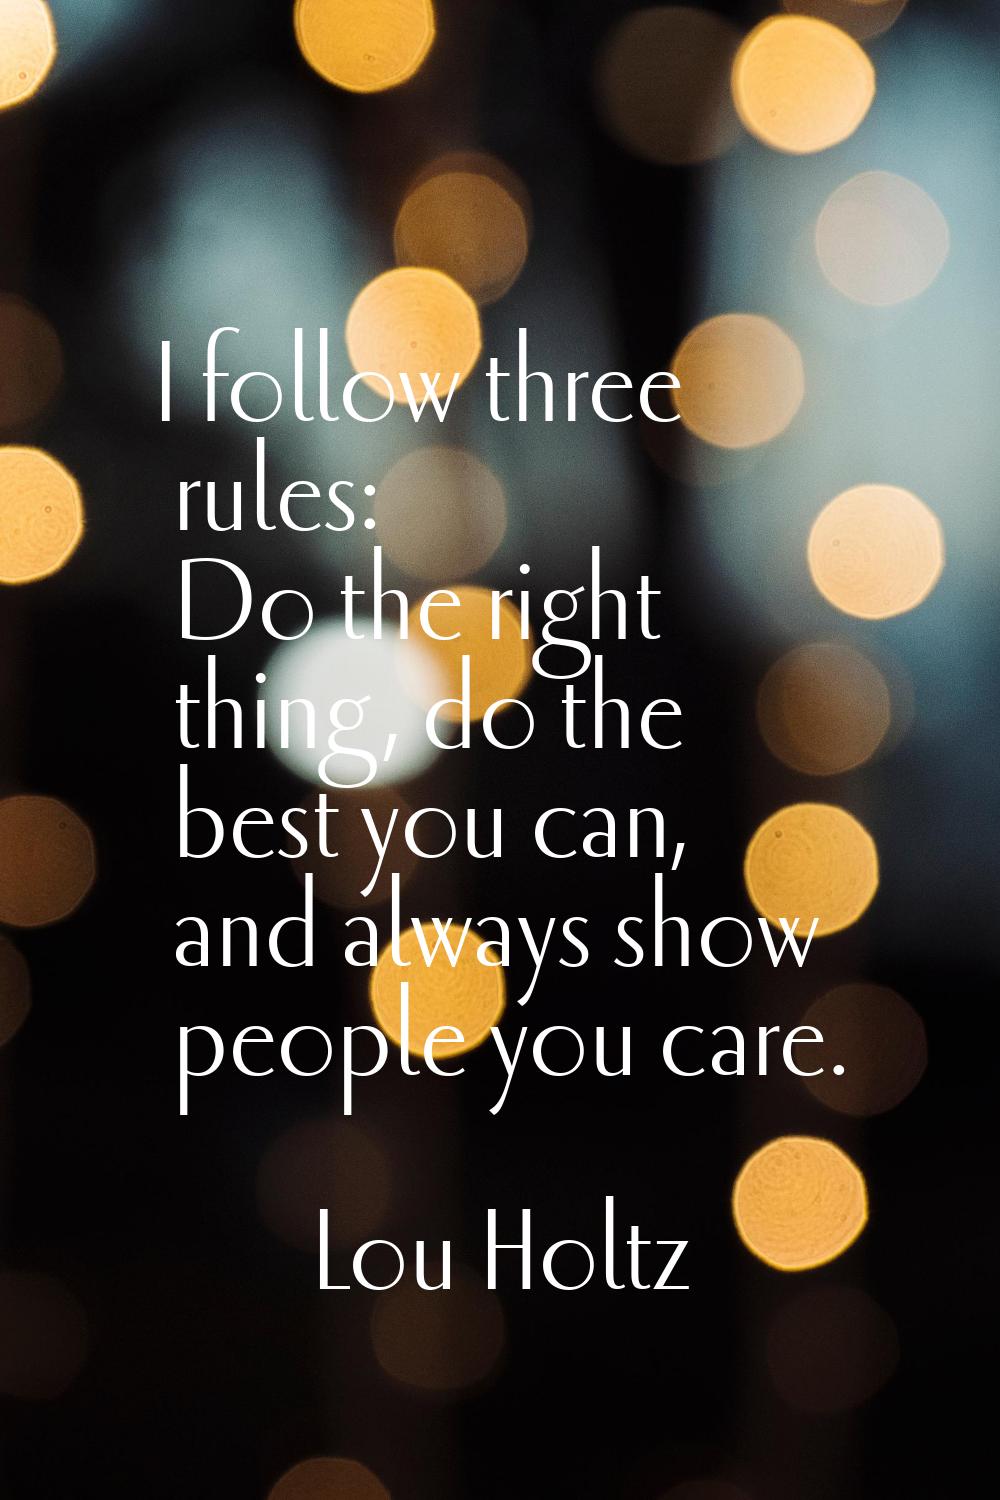 I follow three rules: Do the right thing, do the best you can, and always show people you care.